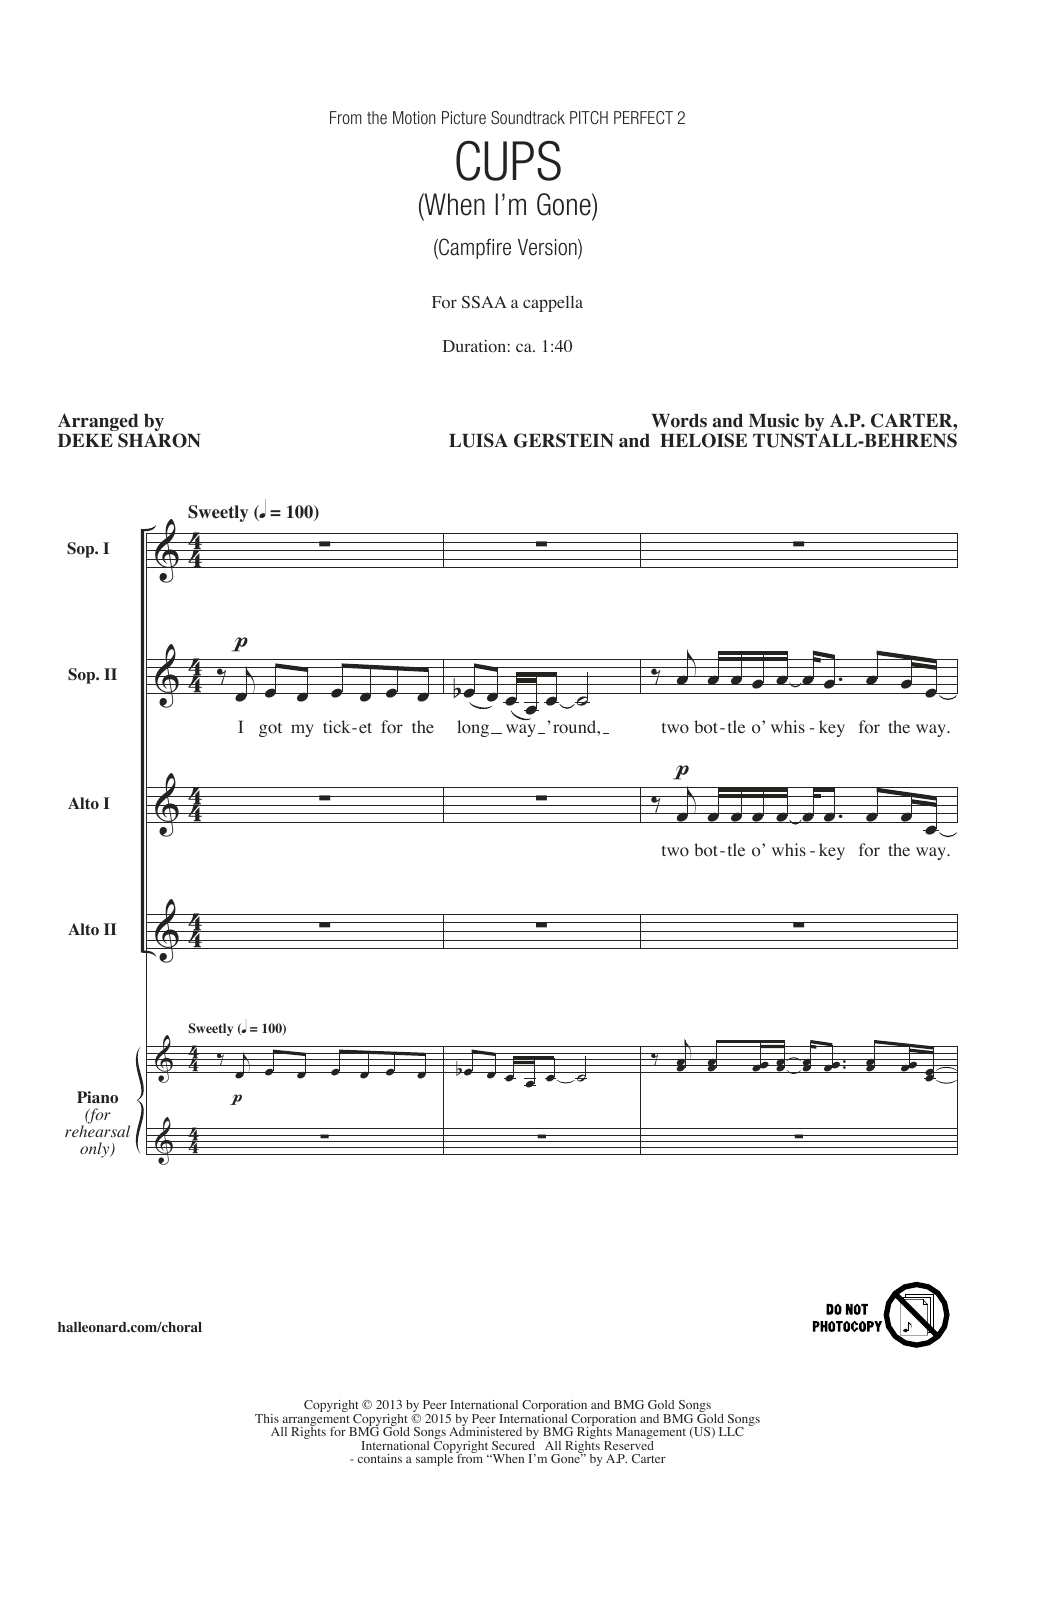 Download Anna Kendrick Cups (When I'm Gone) (Campfire Version) Sheet Music